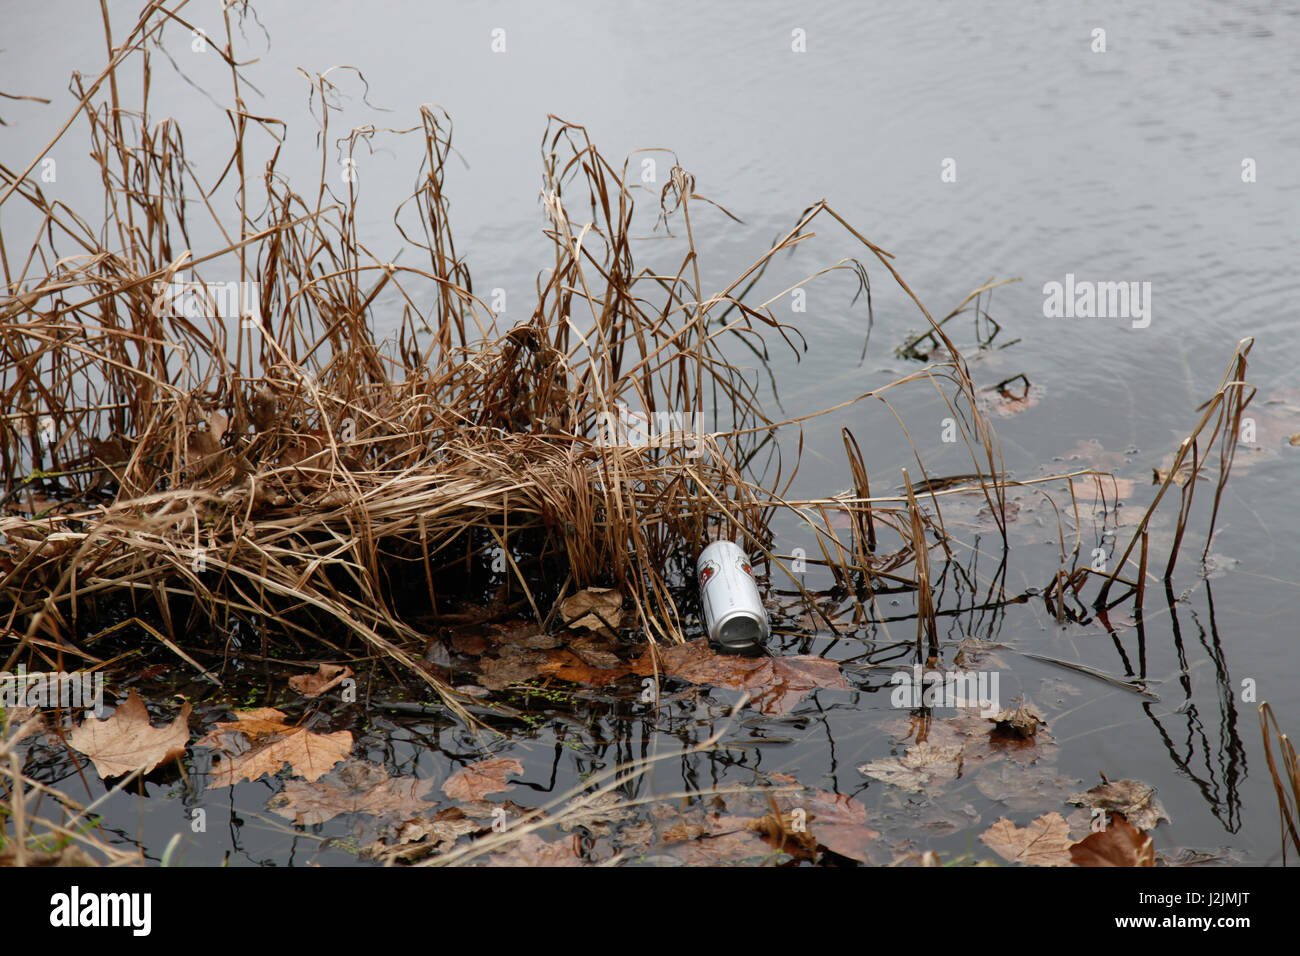 Metal drinks can, discarded into a lake, trapped by reeds and left to rot. Stock Photo